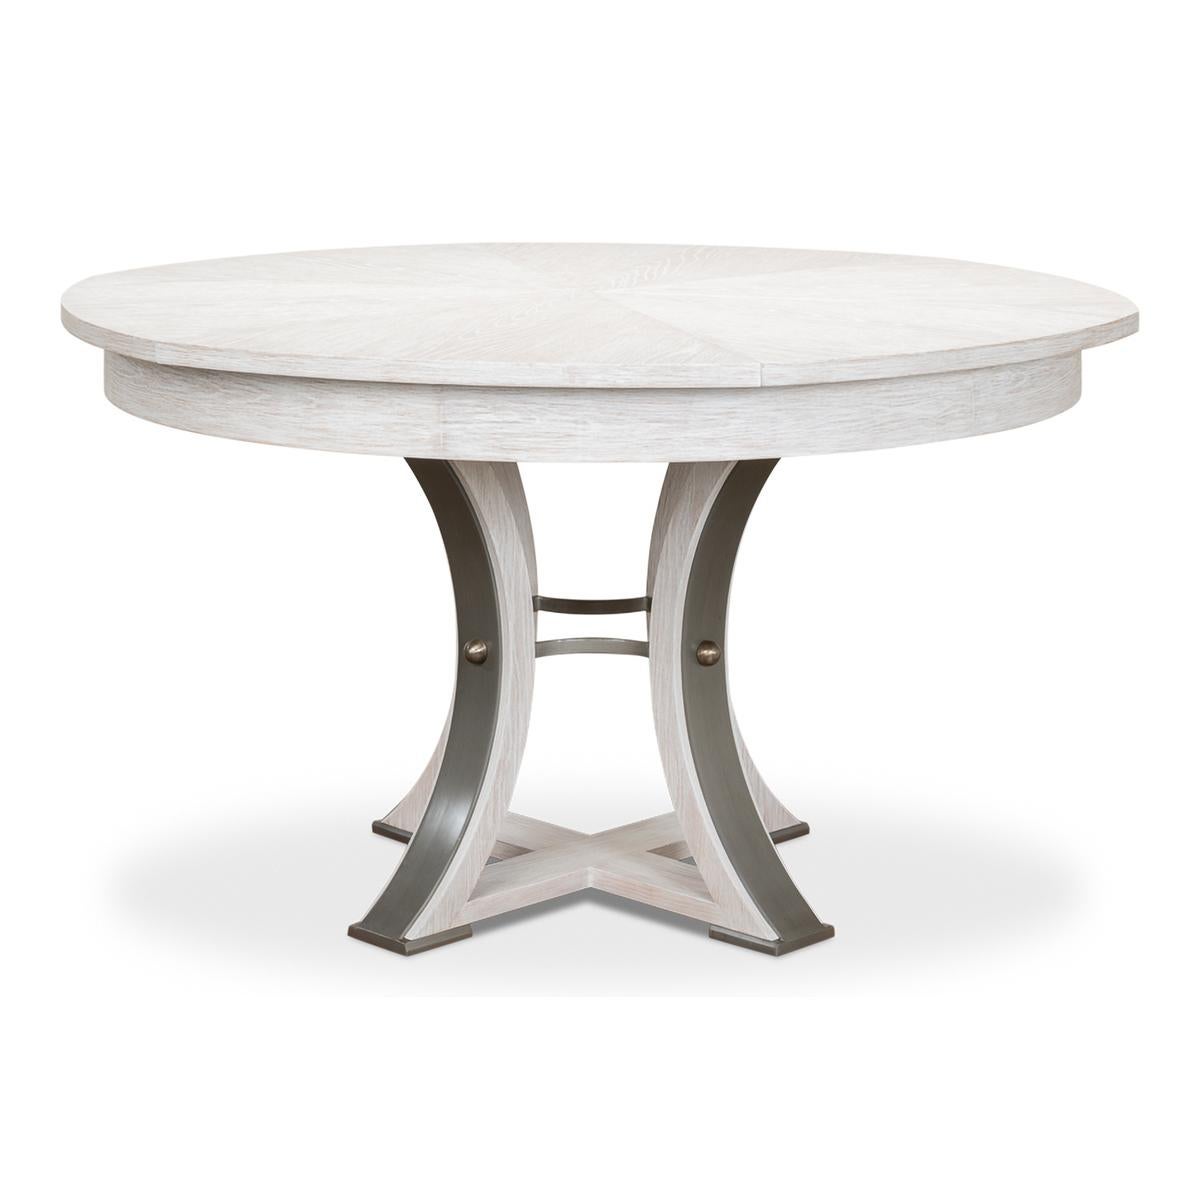 A modern industrial style round extending dining room table. Wire brushed oak top in our working white finish with gunmetal iron accents to the simple geometric form base. The table opens and extends to 70